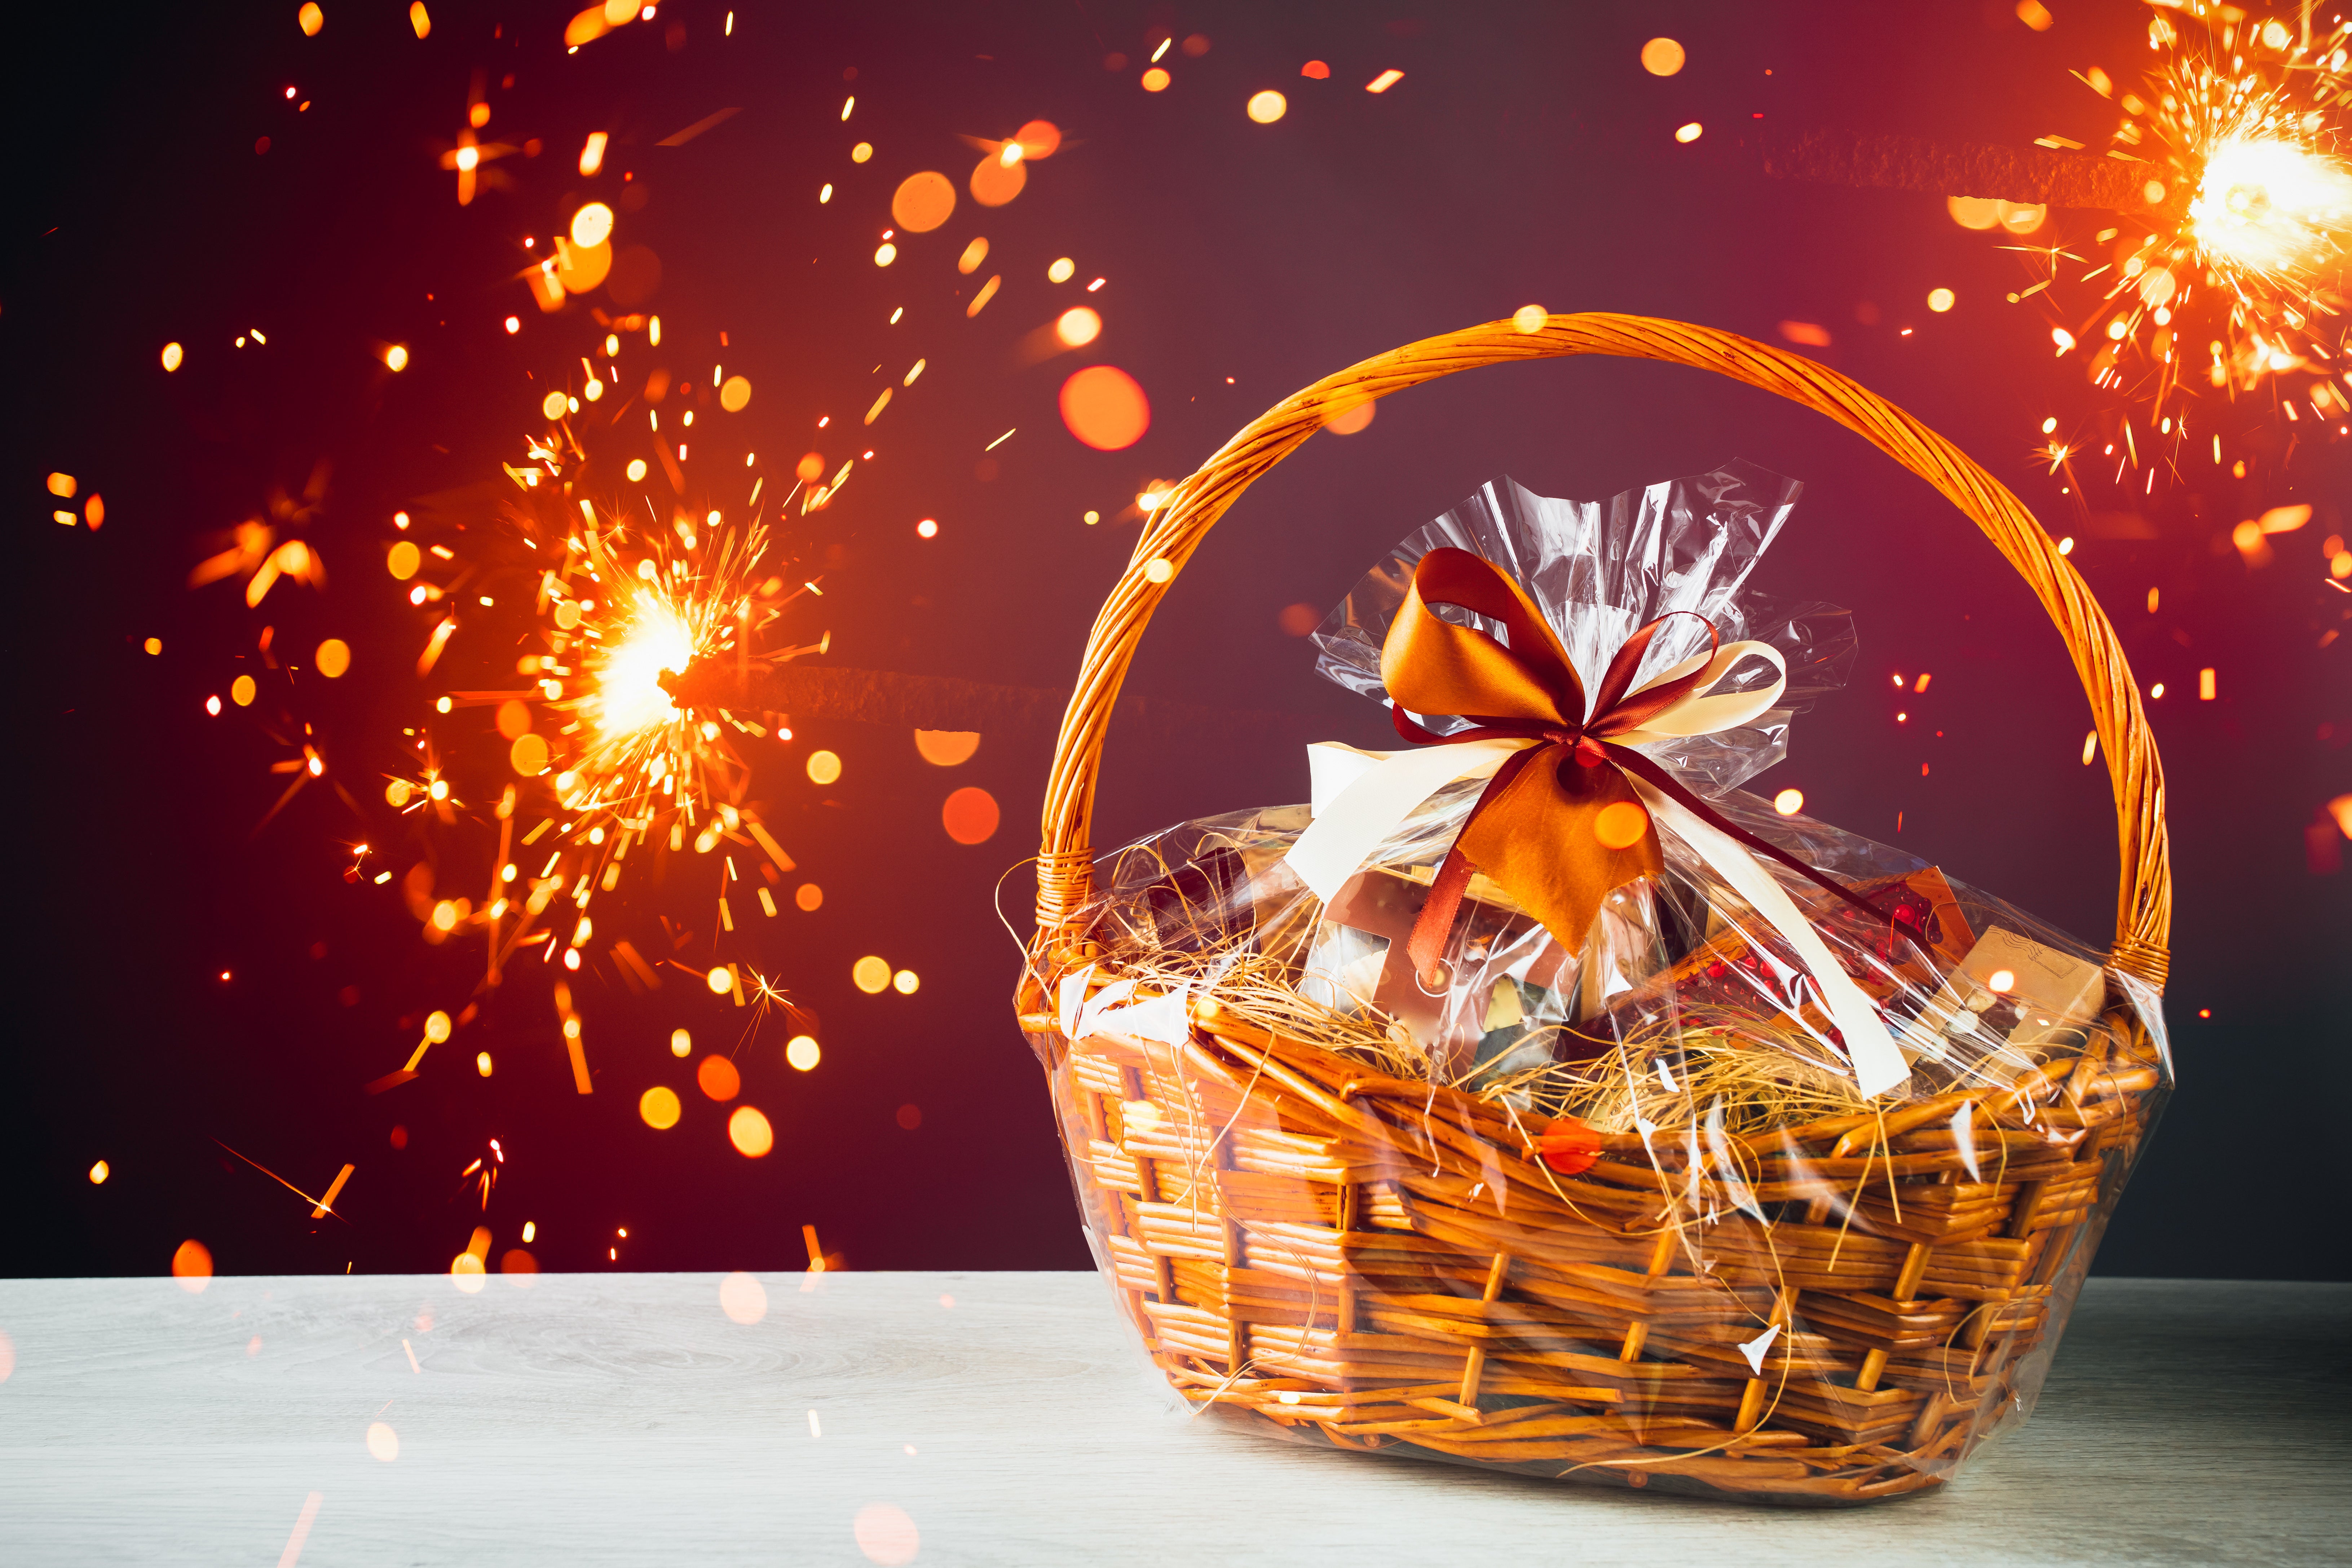 Celebrate the Holiday Season with Unique Holiday Gift Baskets